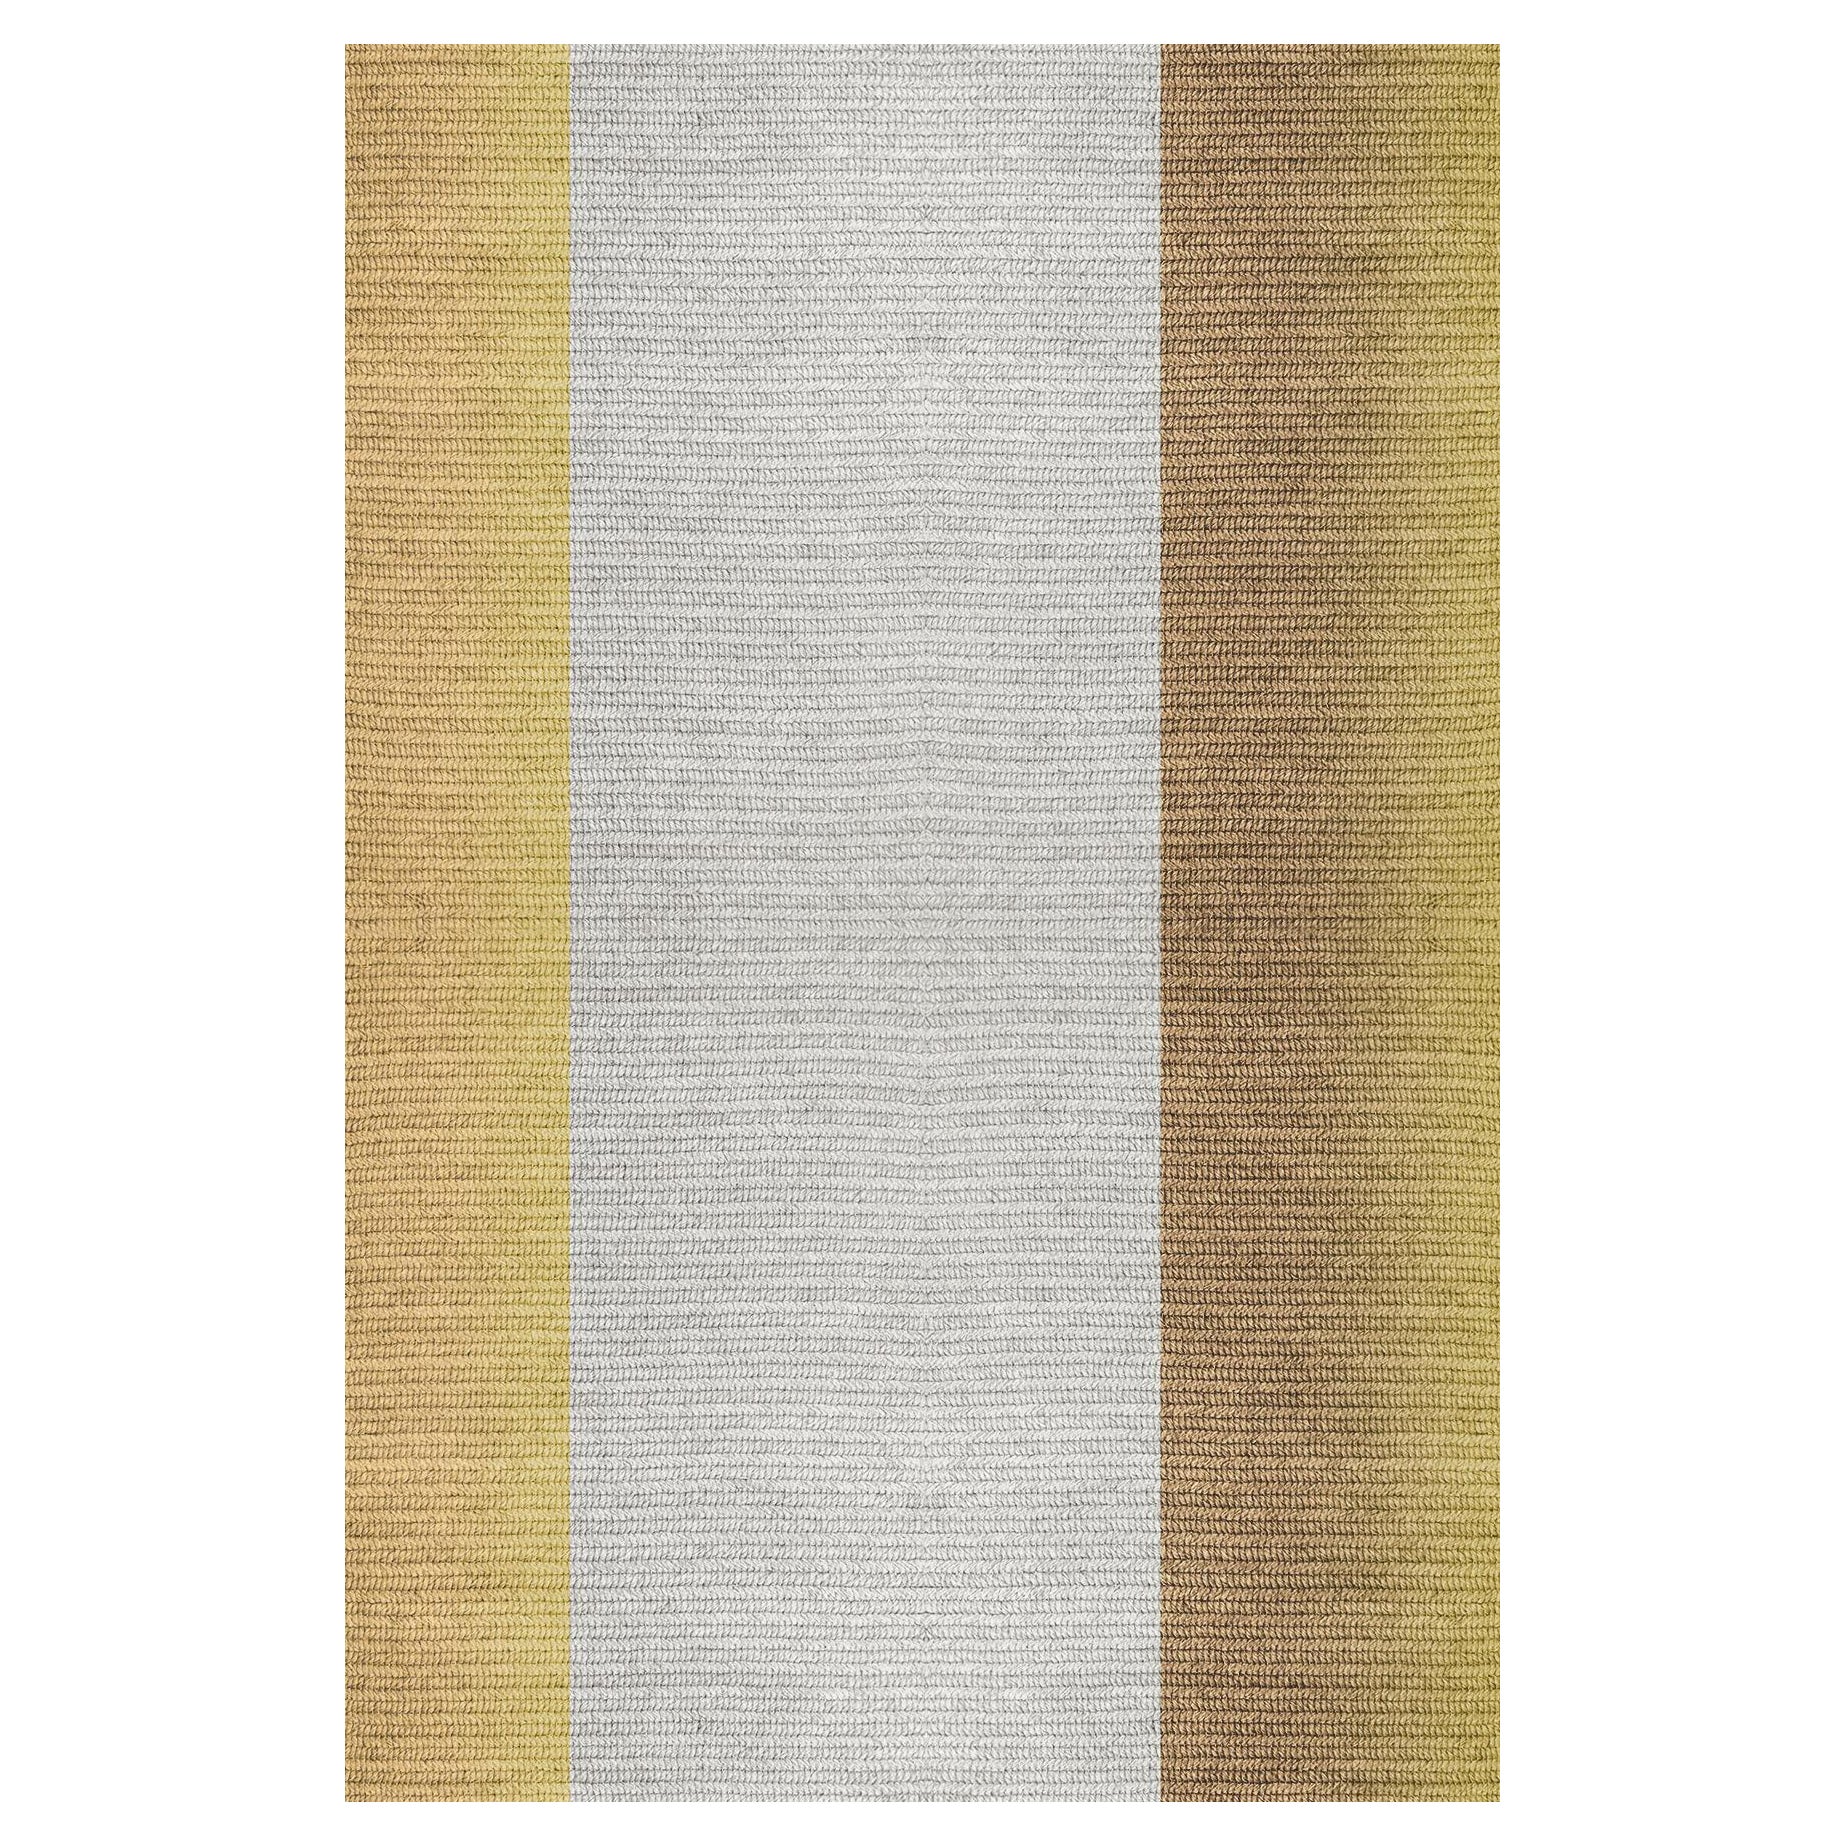 'Blur' Rug in abaca, Colour 'Pampas', by Claire Vos for Musett Design